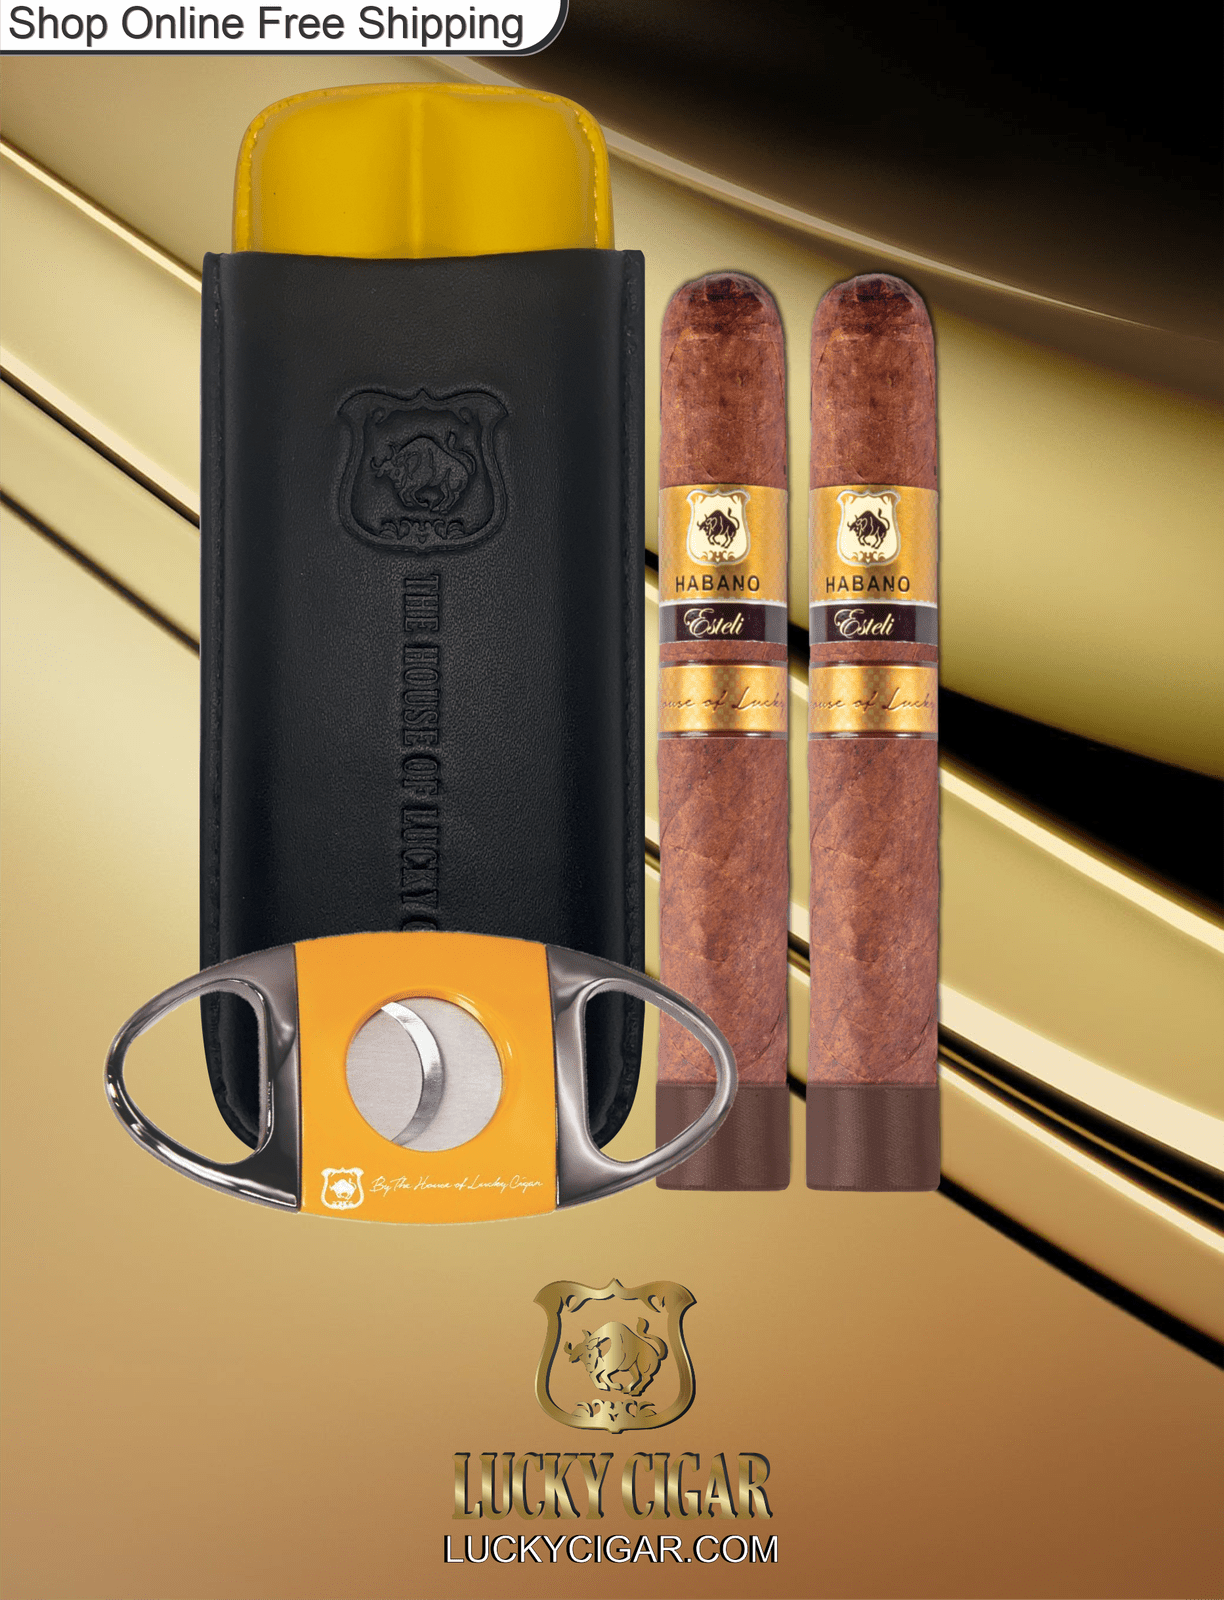 Cigar Lifestyle Accessories: Yellow &  Black Leather  Humidor Comes With yellow cutter and 2 habano Esteli cigars